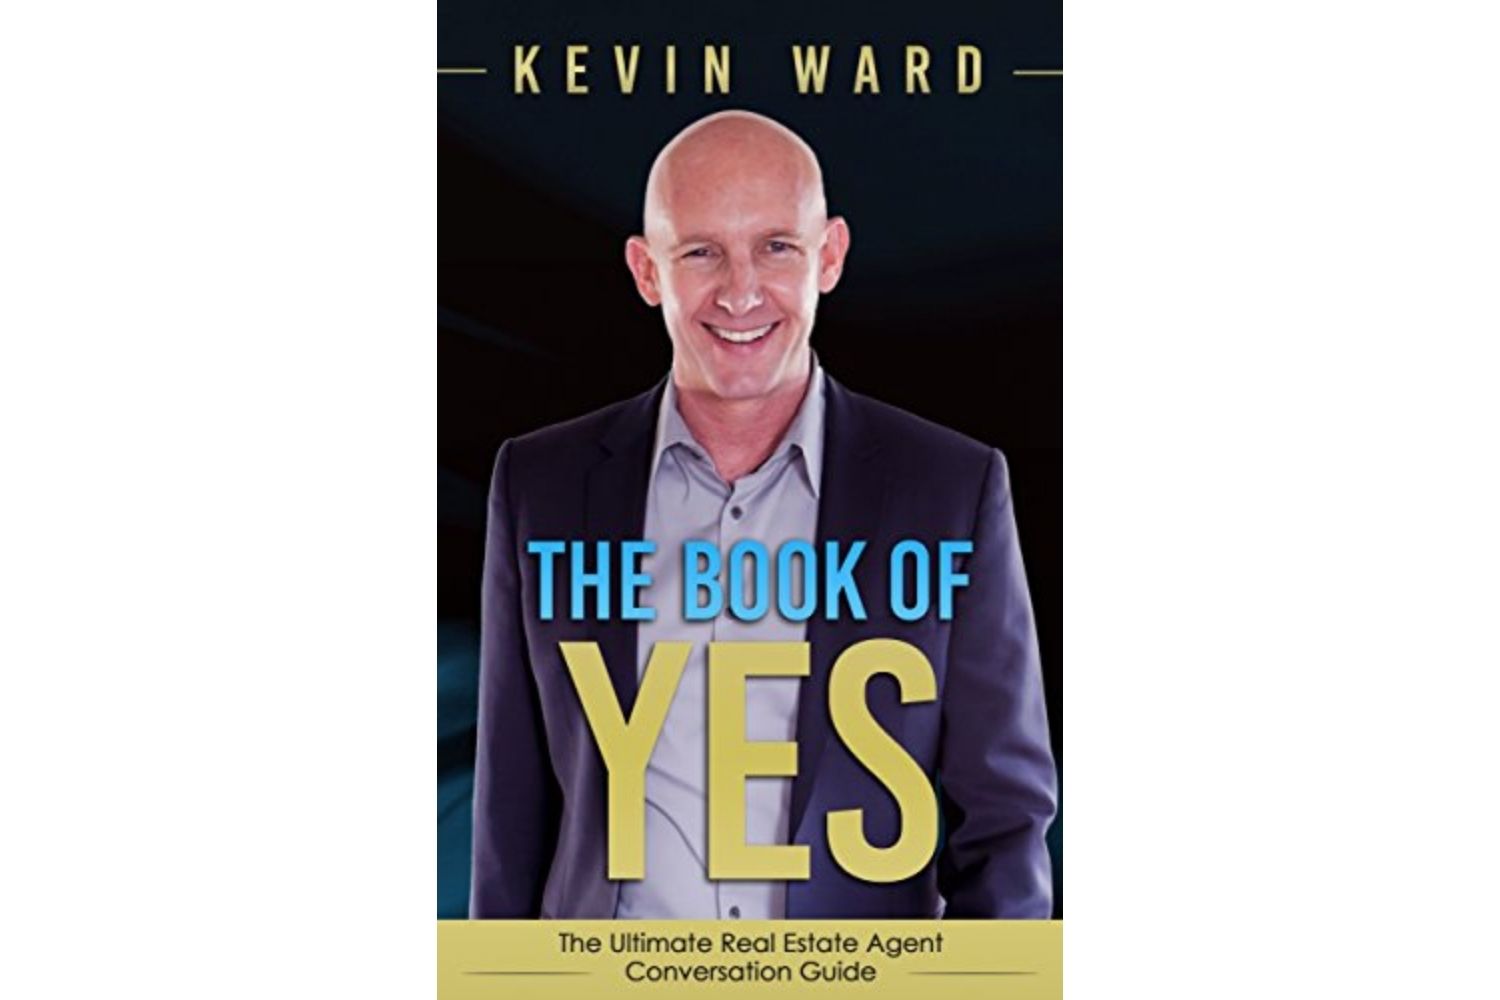 The Best Real Estate Books Options: The Book of YES